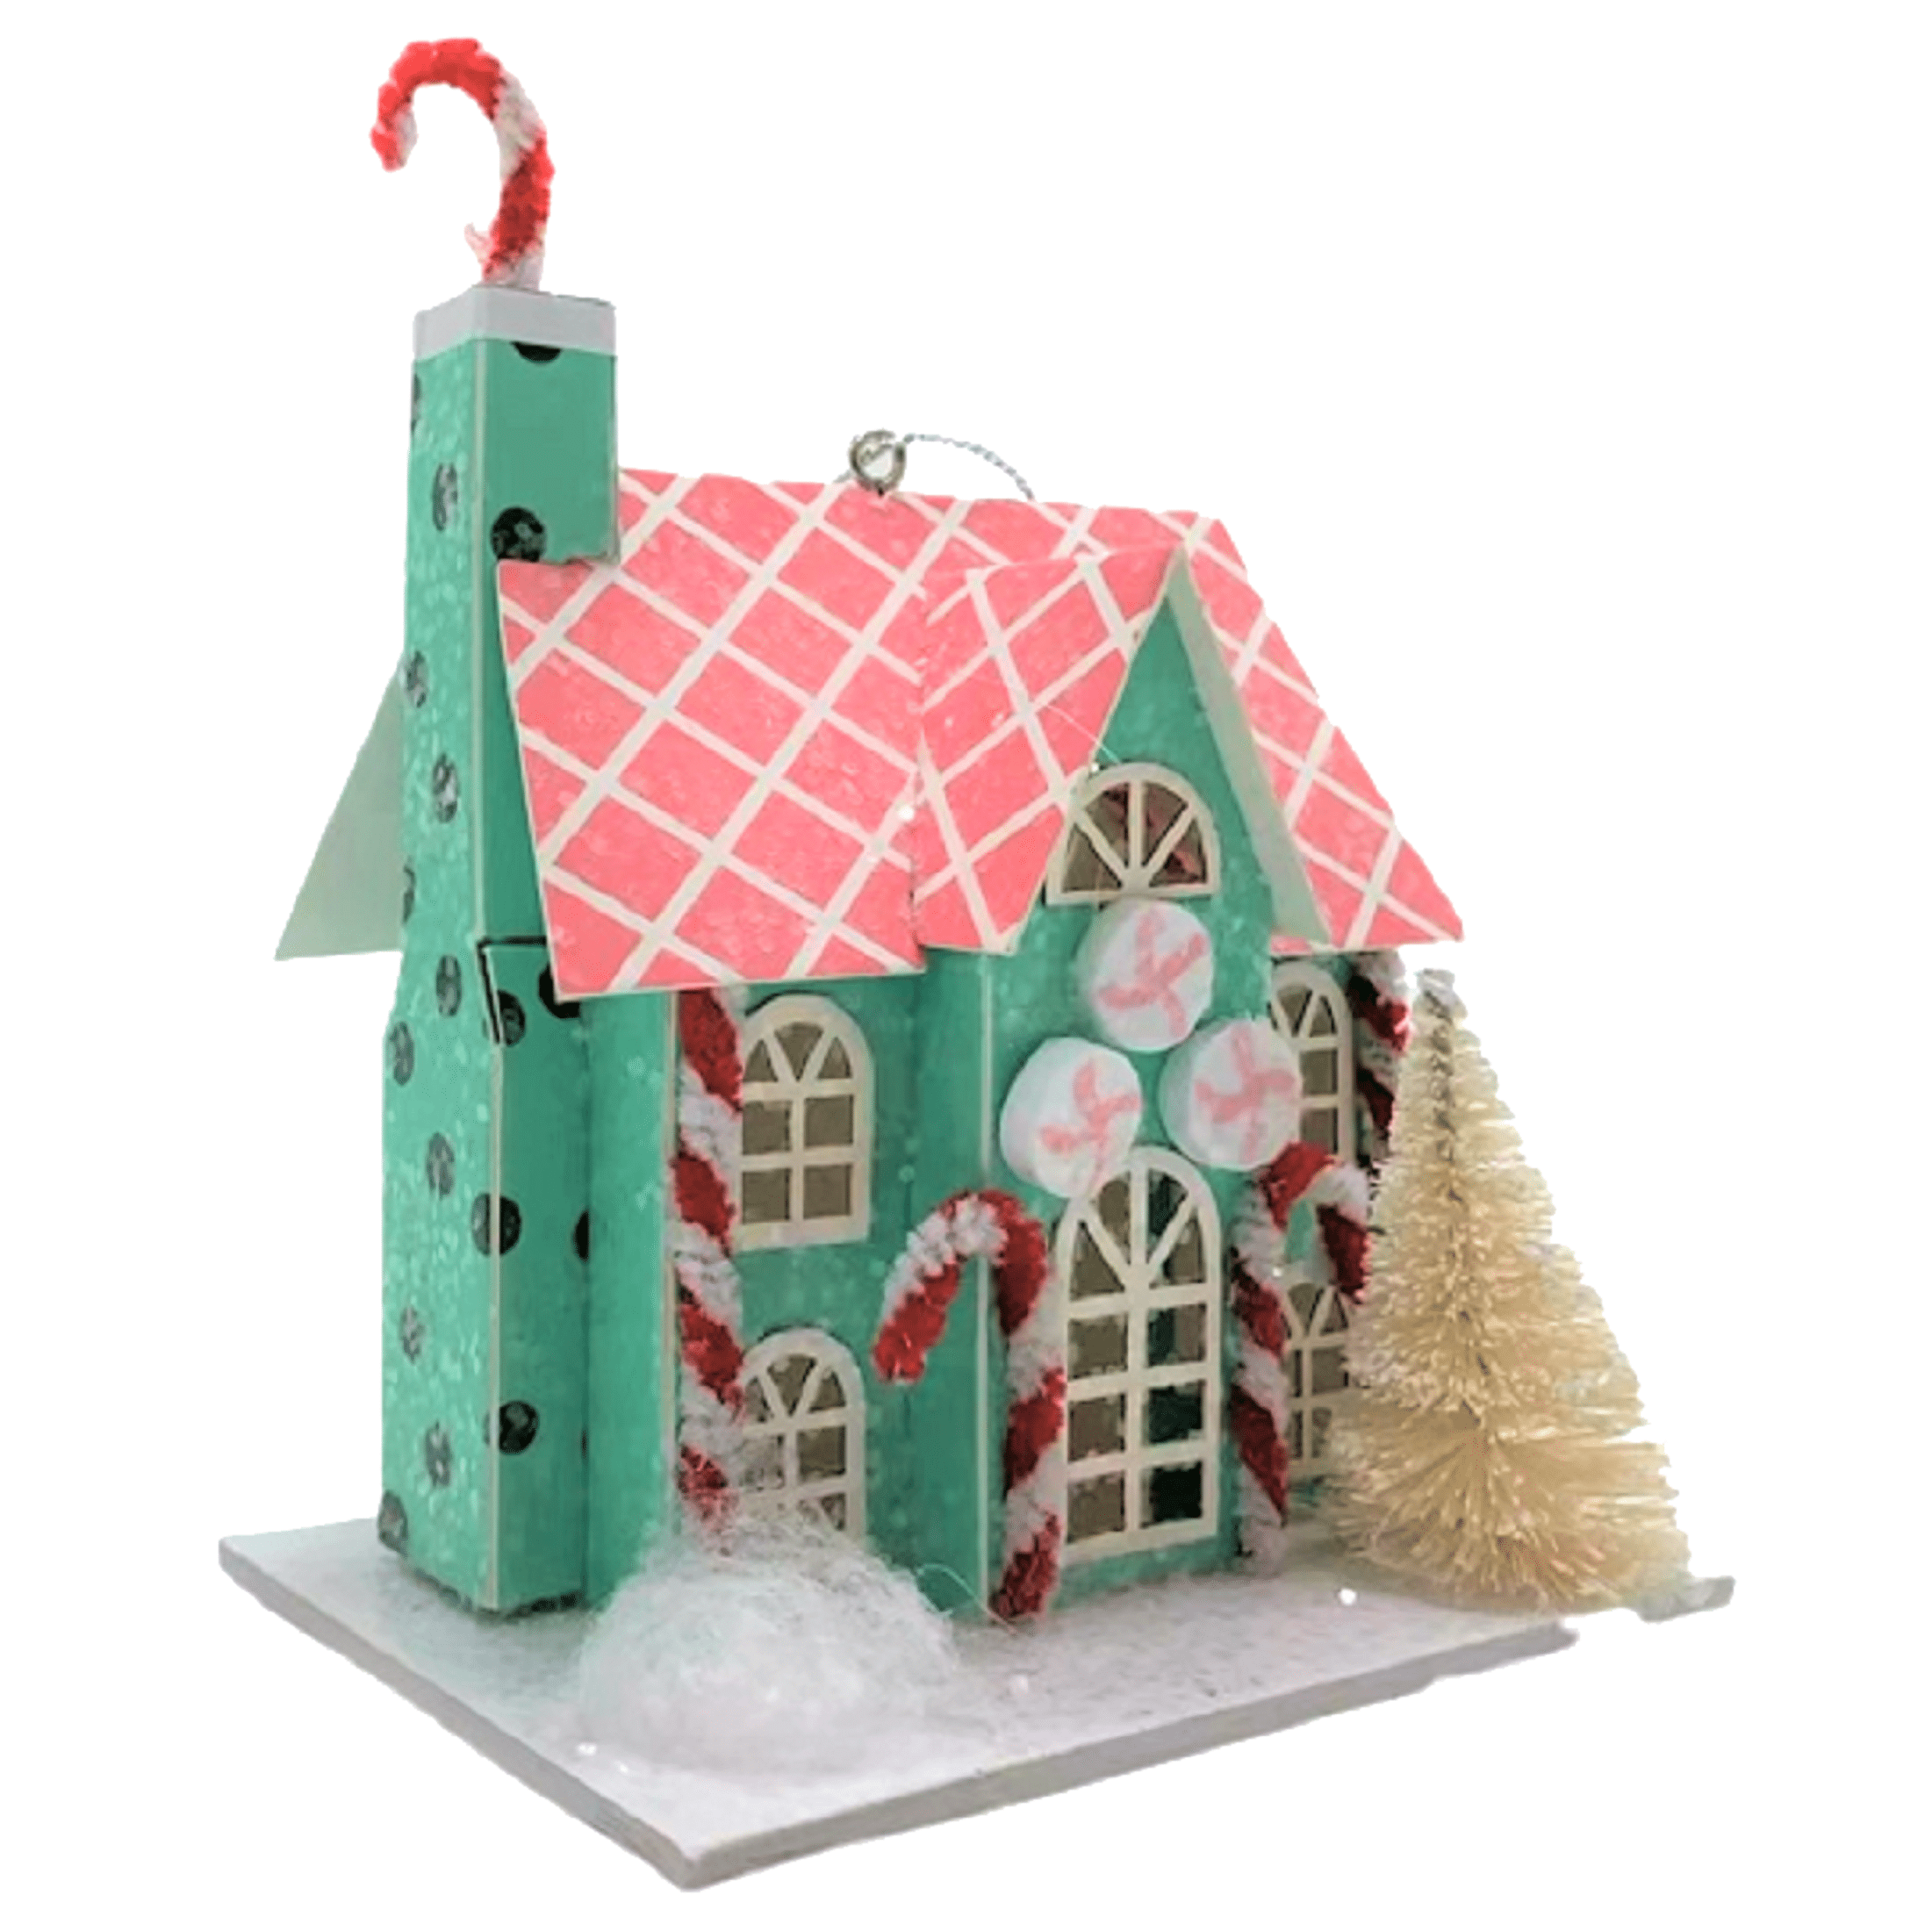 Holiday Time Paper Candy House Ornament. Ho Ho Ho Theme. Pink & Teal Color House. Paper House Ornament.